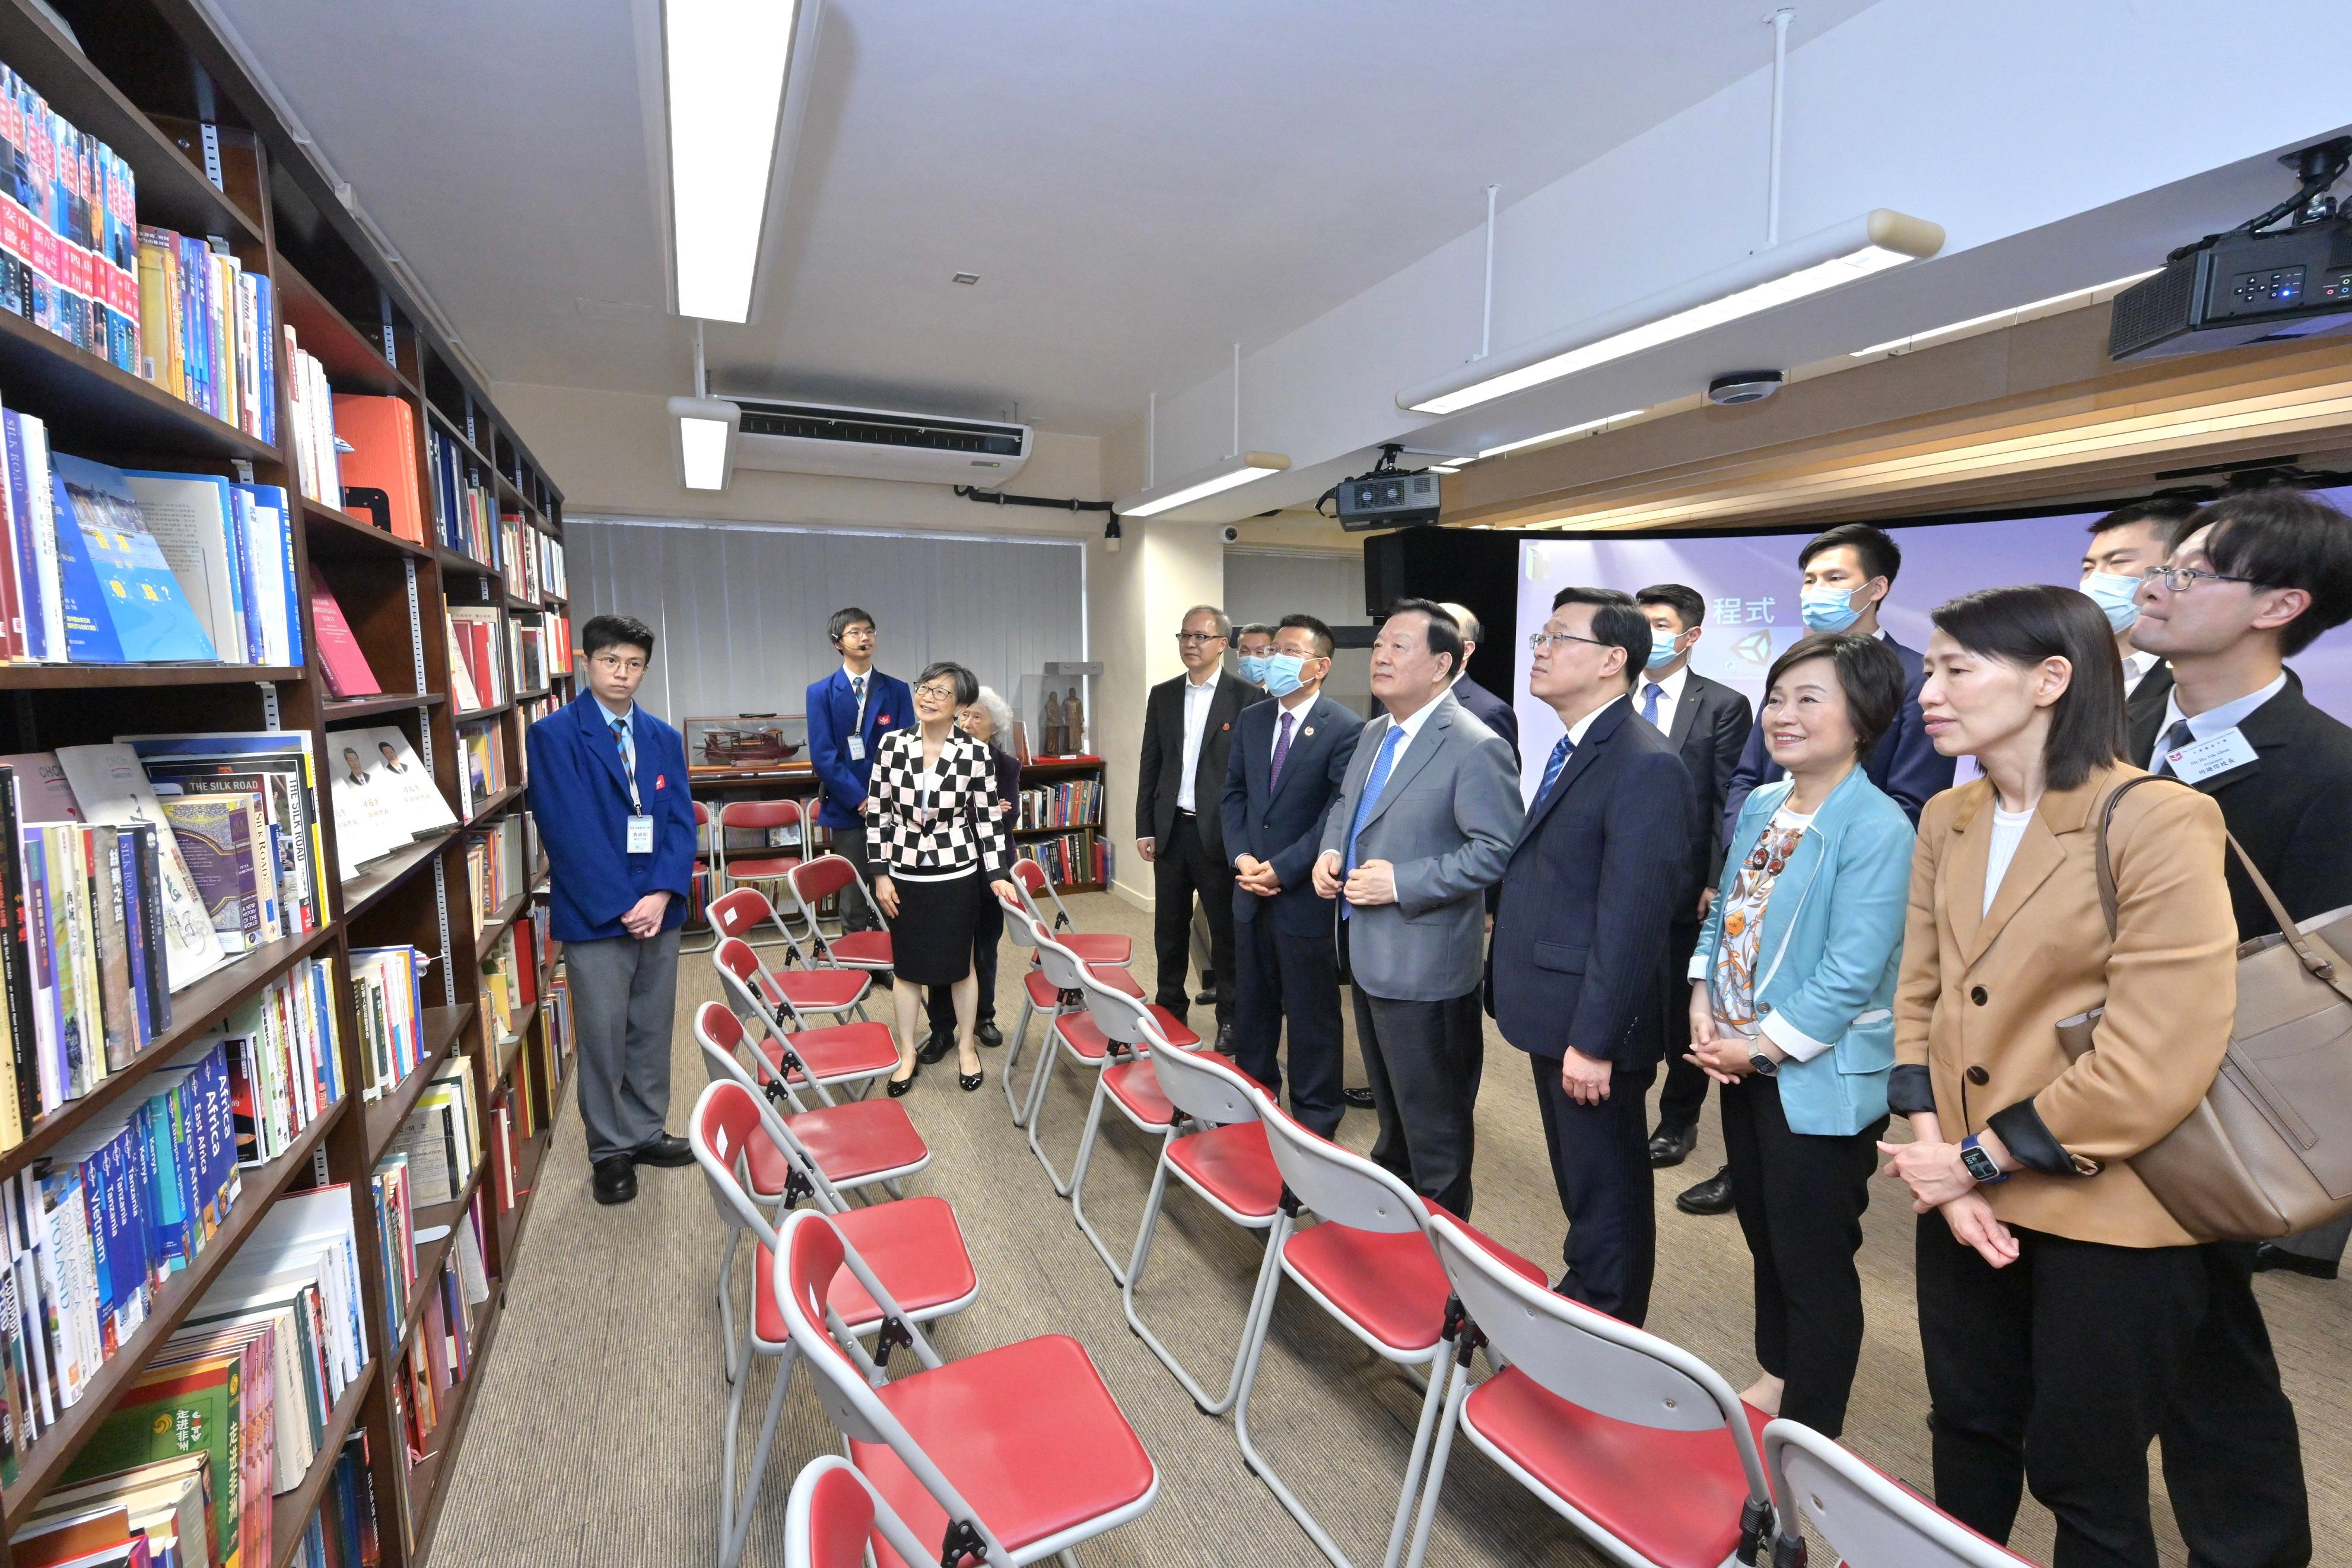 The Vice Chairman of the 13th Chinese People's Political Consultative Conference and Director of the Hong Kong and Macao Affairs Office of the State Council, Mr Xia Baolong (fourth right), accompanied by the Chief Executive, Mr John Lee (third right); and the Secretary for Education, Dr Choi Yuk-lin (second right), visited the Chinese Foundation Secondary School and listened to students' sharing on their learning experience today (April 18).